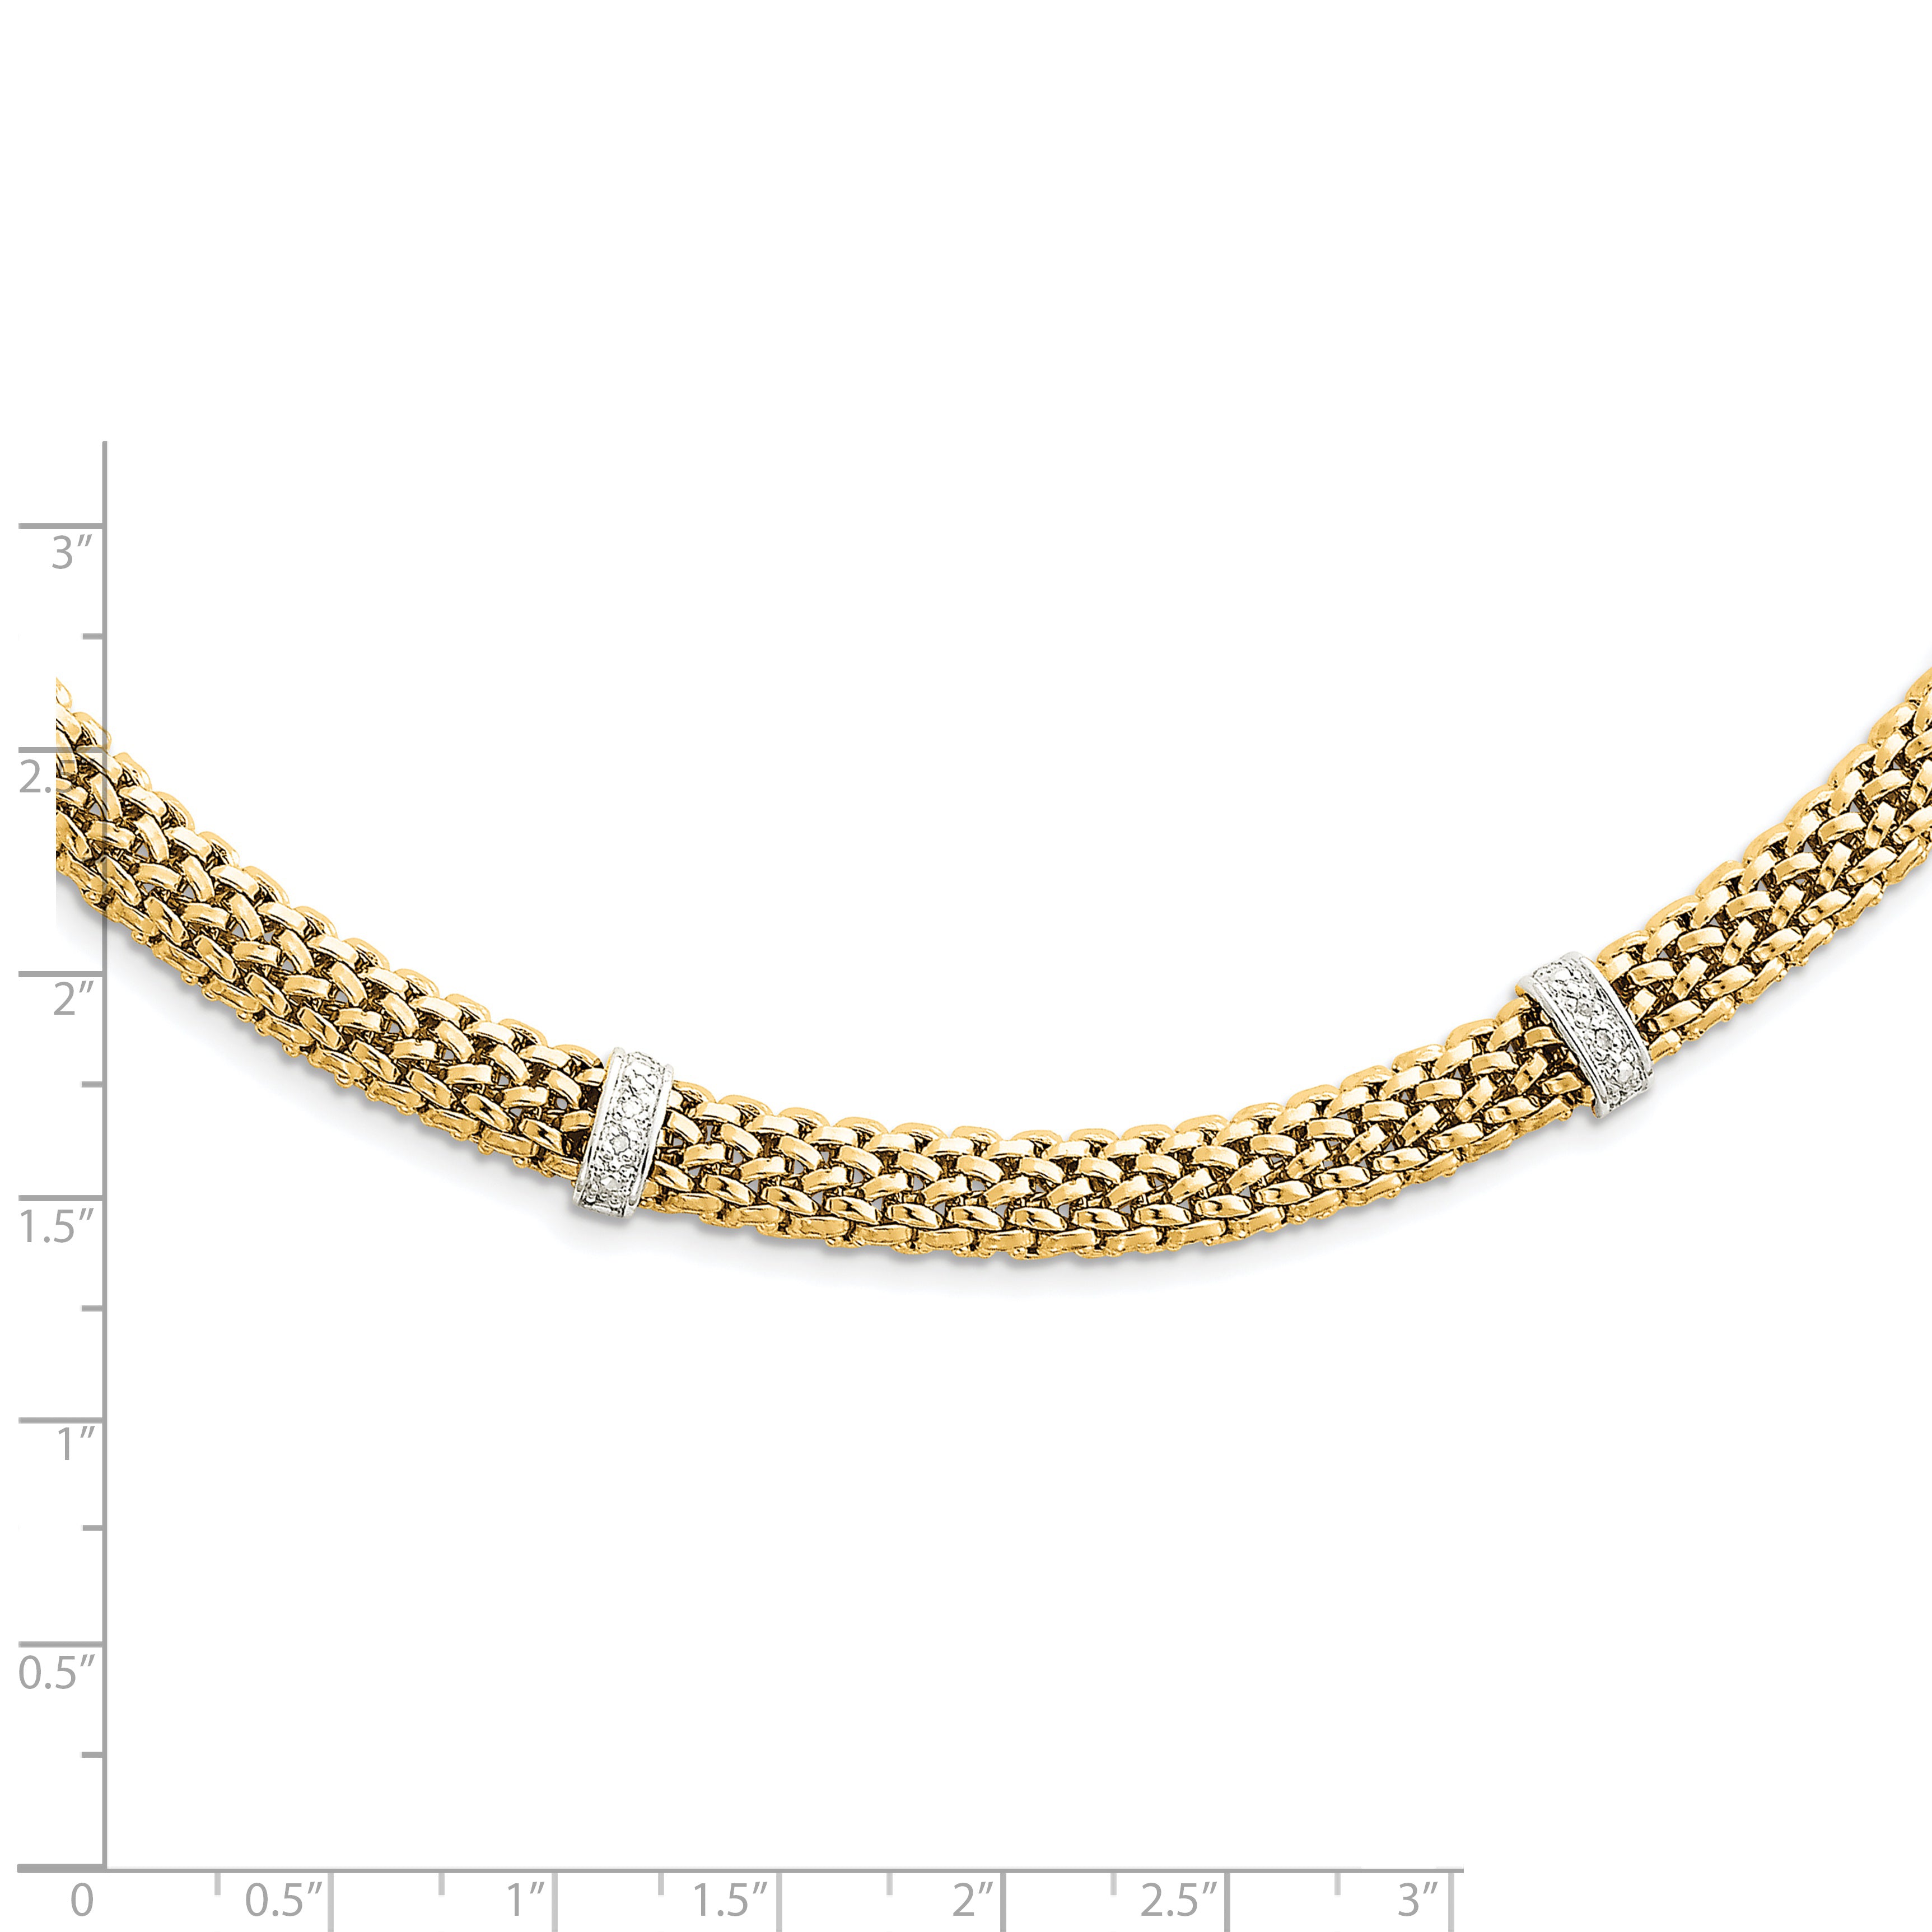 14k Two-Tone 17in .05ct Completed Polished Diamond & Mesh Necklace